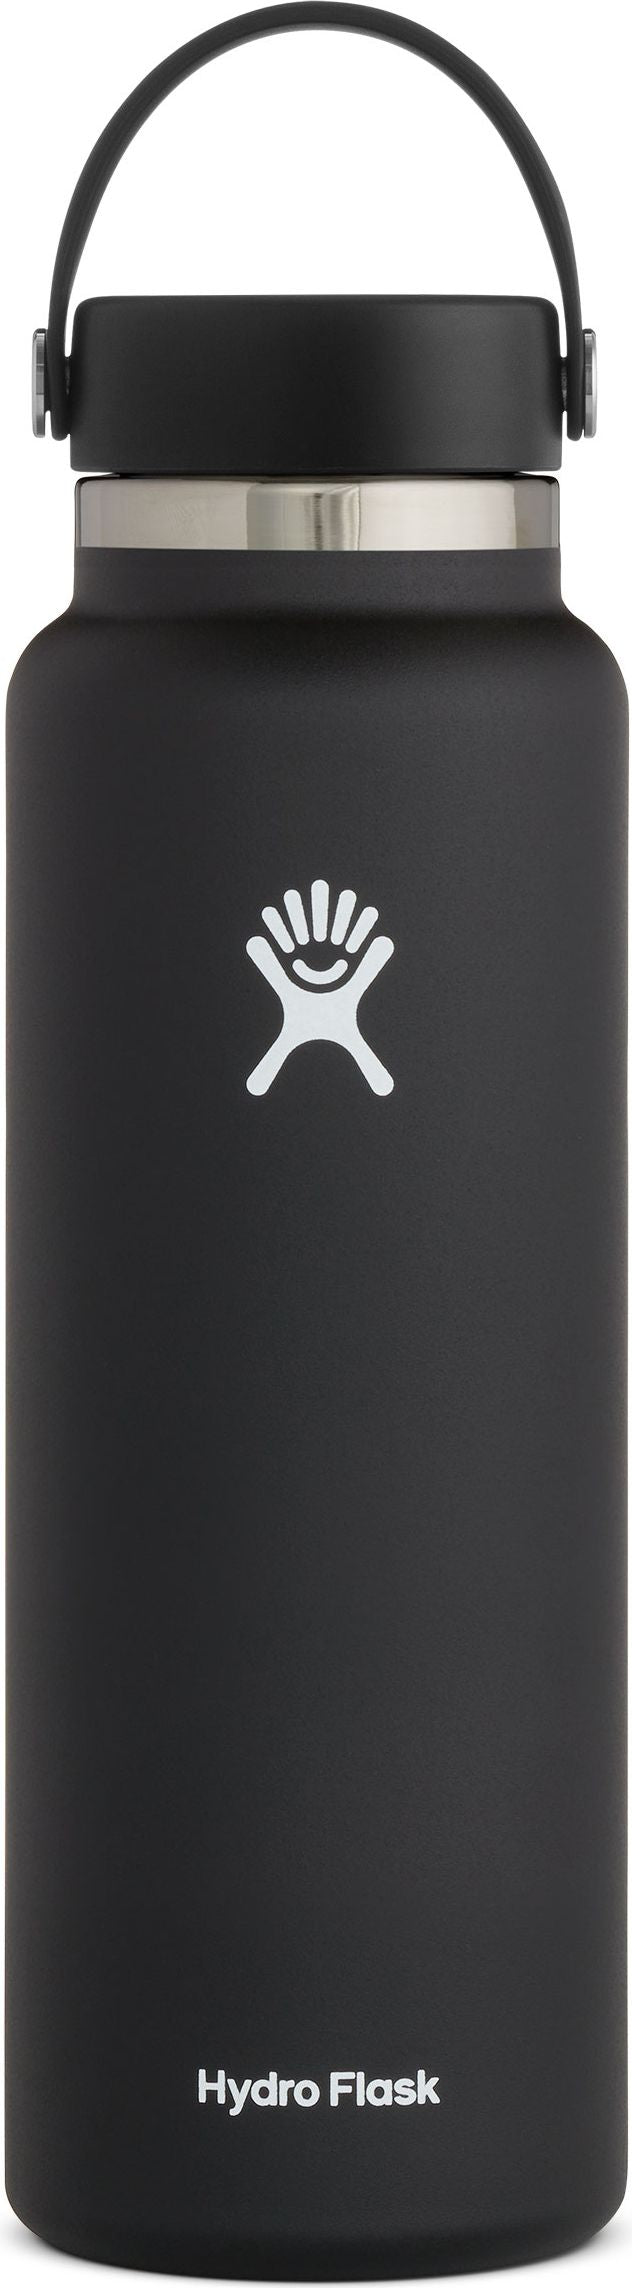 Hydro Flask Accessories 40oz Wide Mouth 2.0 Black